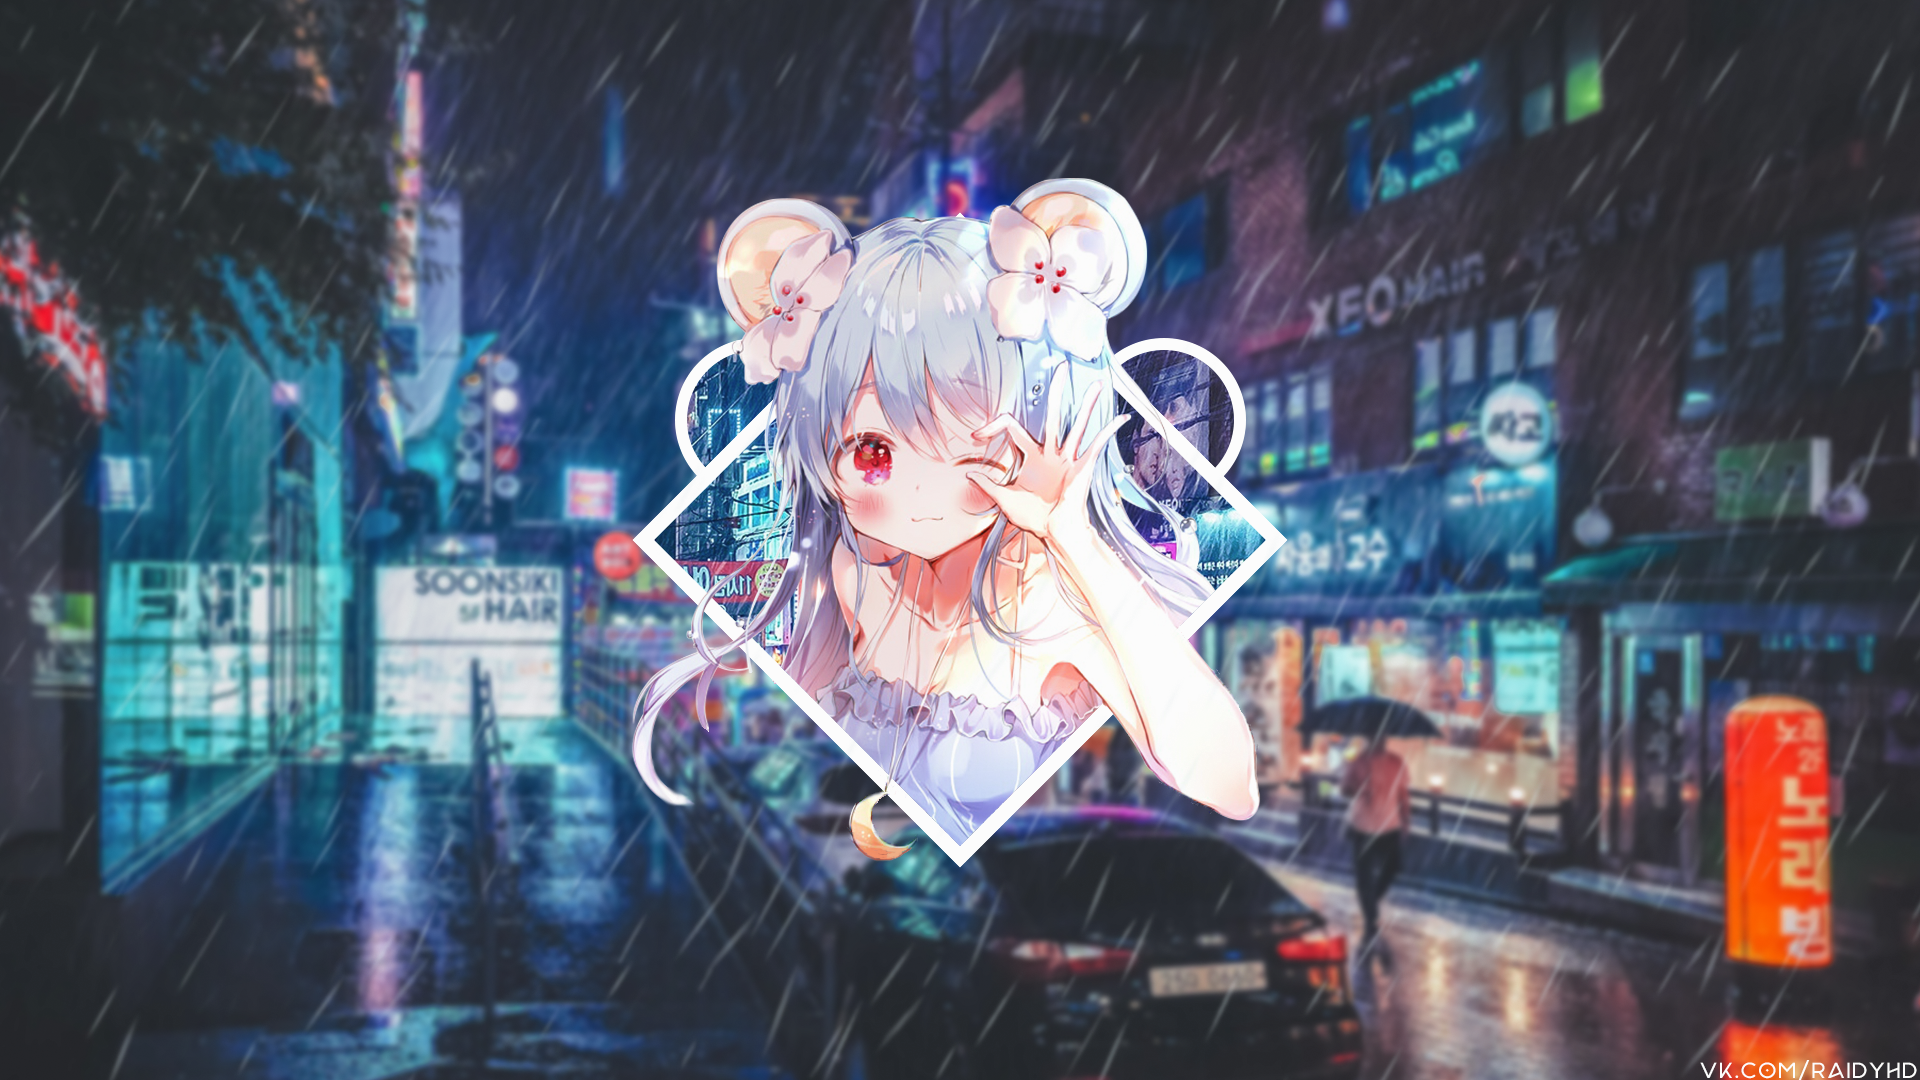 Wallpaper, photography, anime girls, picture in picture, road, South Korea, city, neon, lights, rain, cityscape 1920x1080